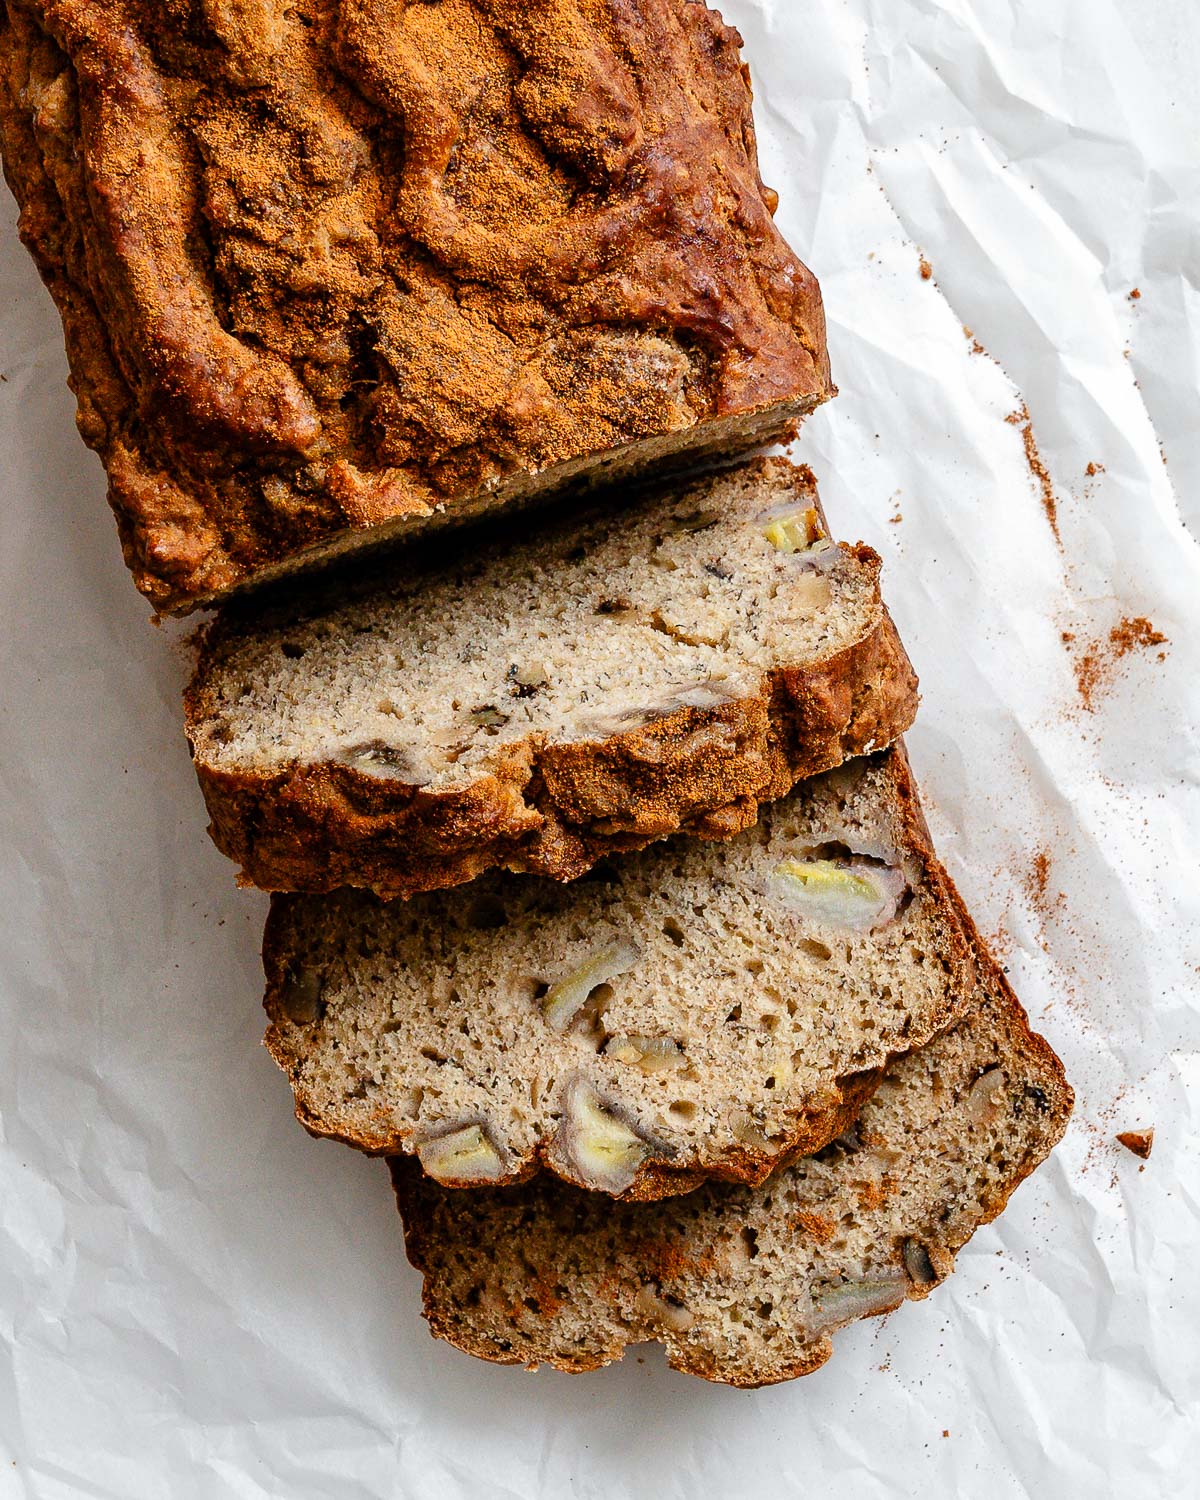 completed sliced Easy Protein Banana Bread on a white surface